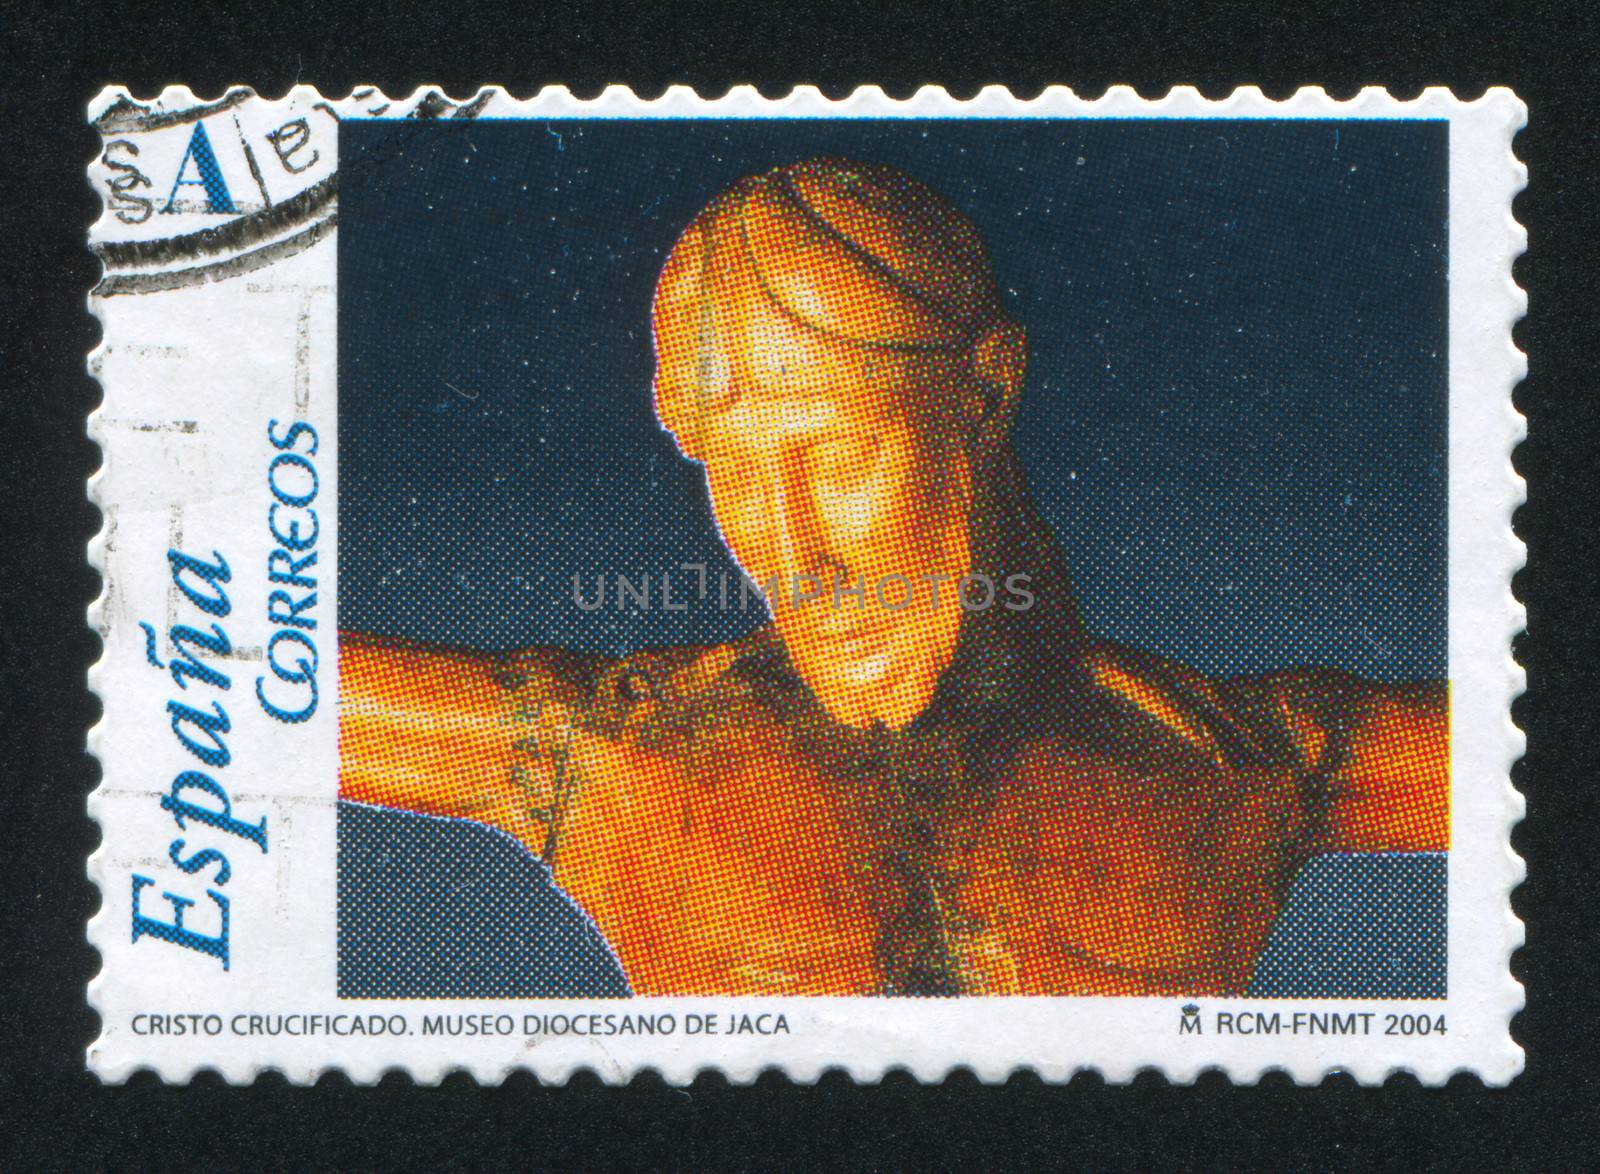 SPAIN - CIRCA 2004: stamp printed by Spain, shows  Crucifixion of Jesus Christ, circa 2004